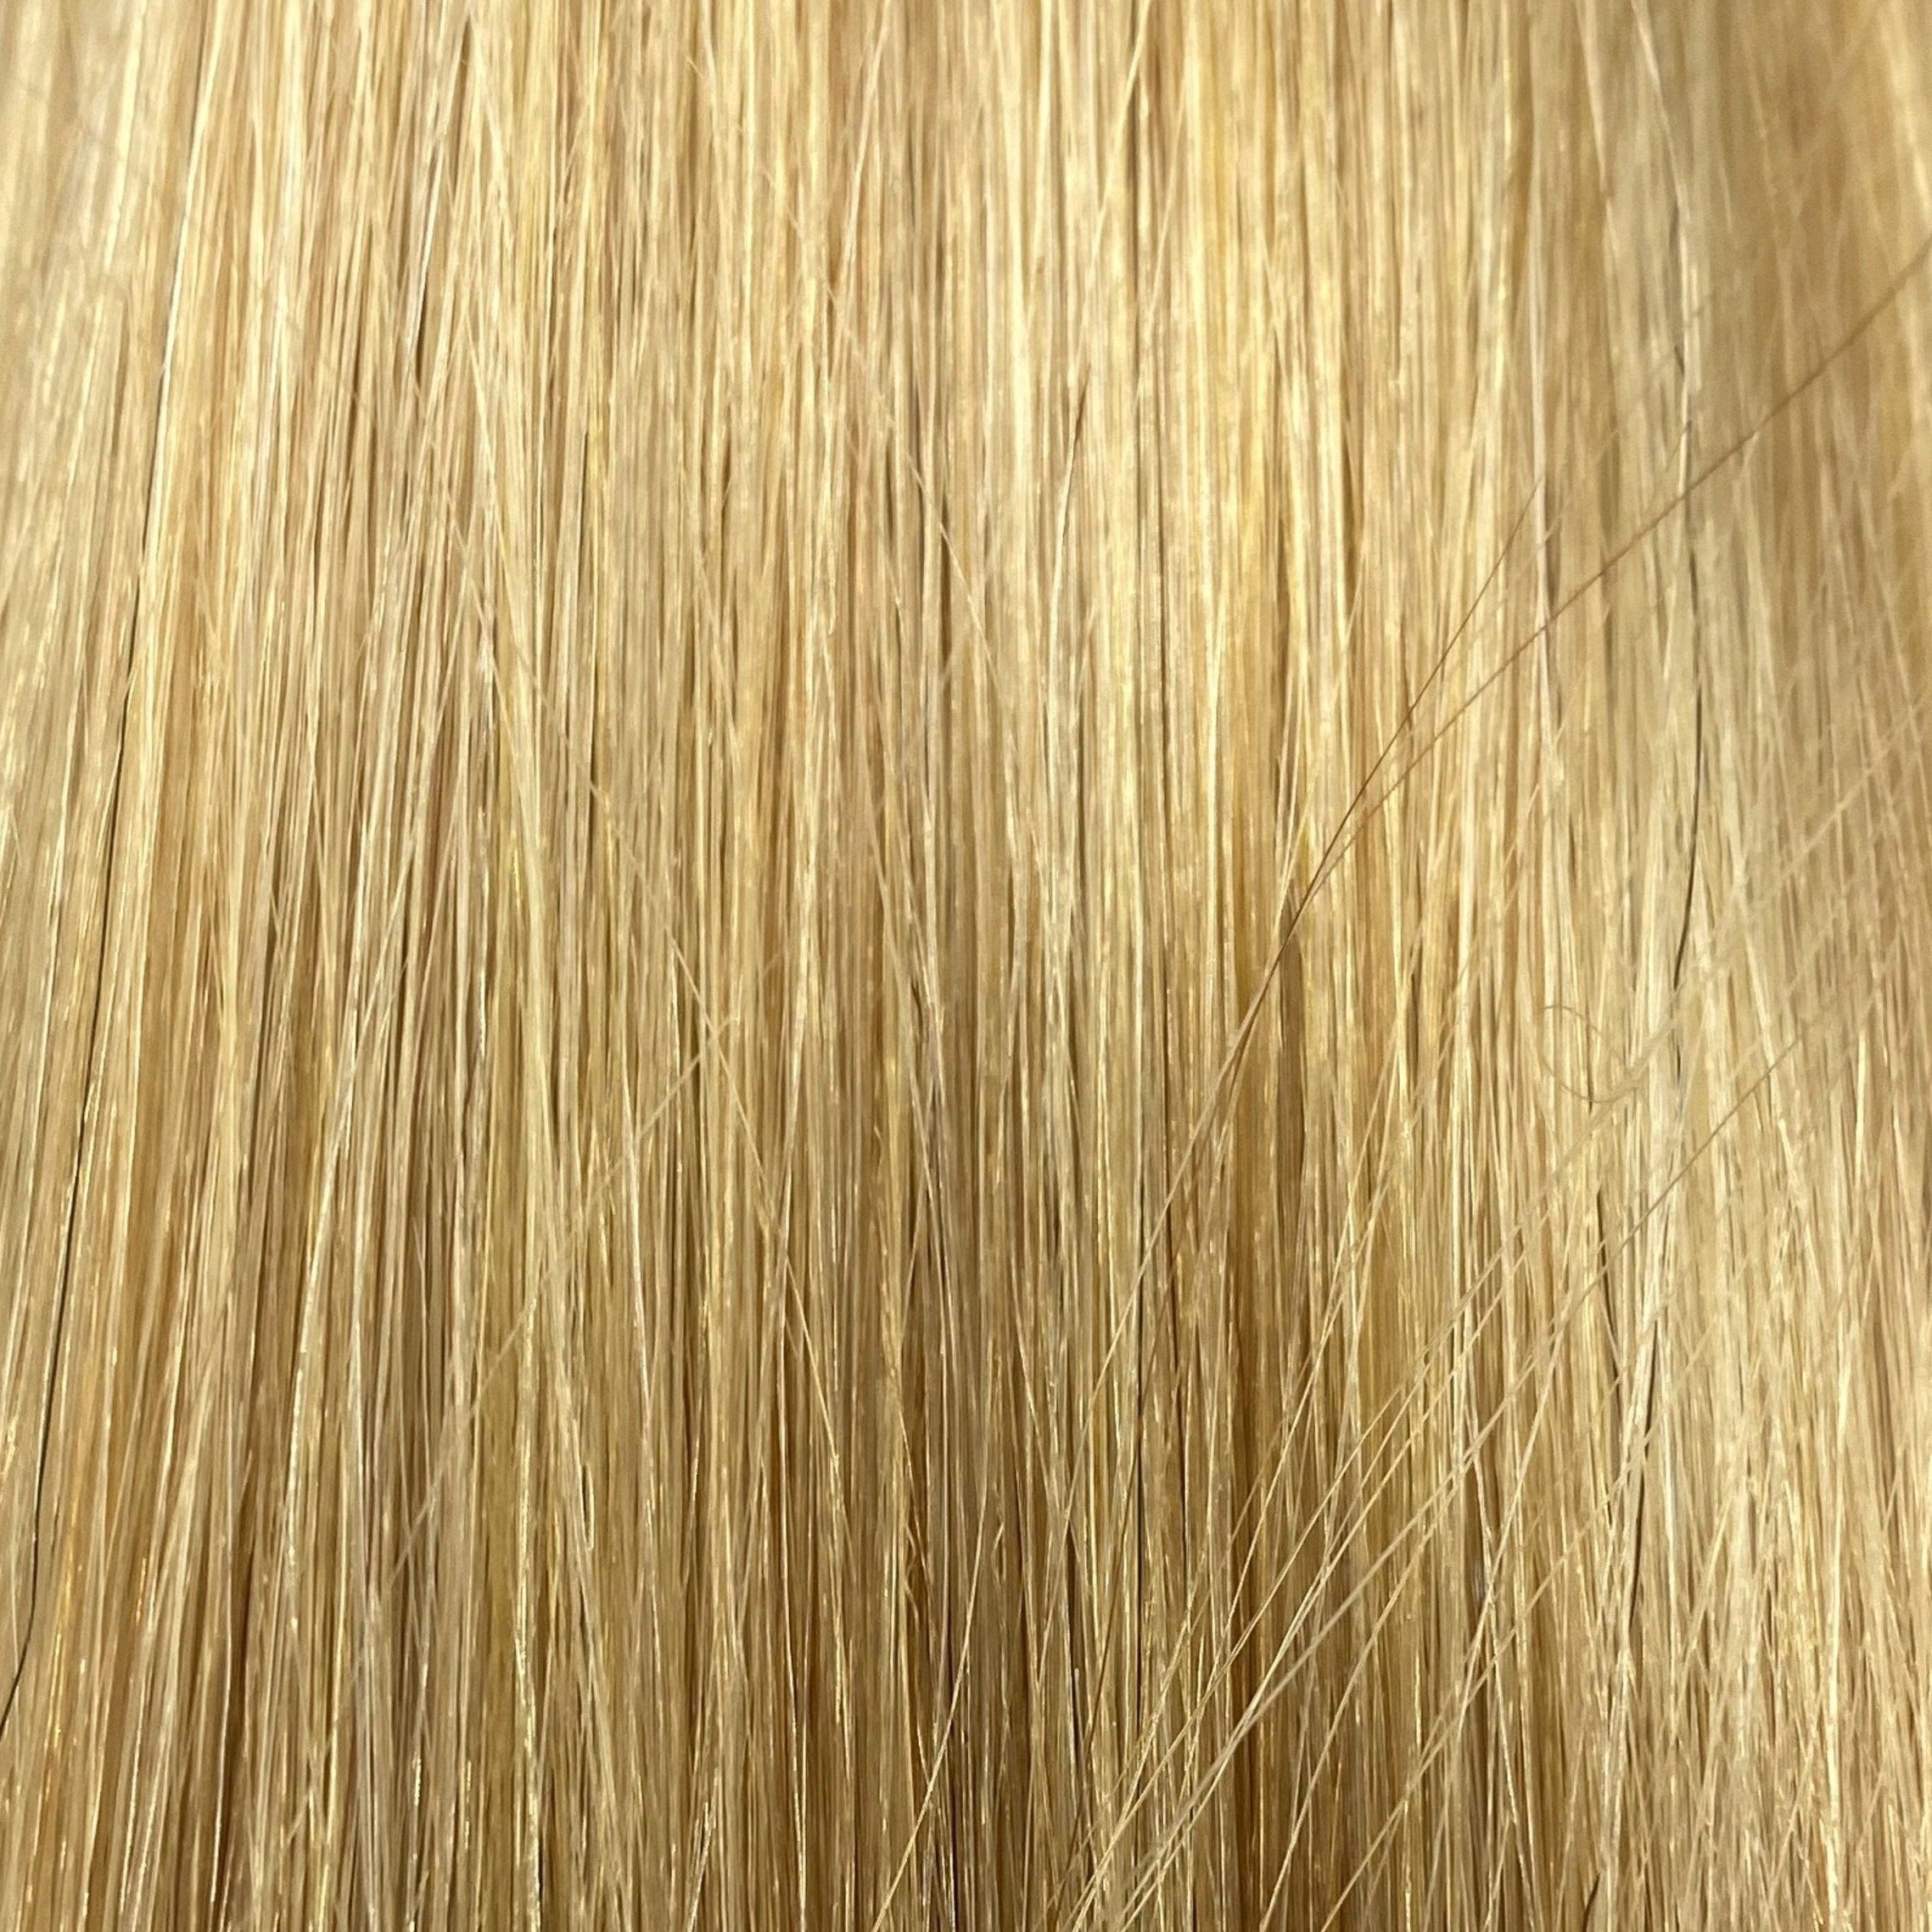 FUSION HIGHLIGHT #140 GOLDEN ULTRA BLONDE 60CM/ 24 INCHES  -  25 GRAMS - Image 1